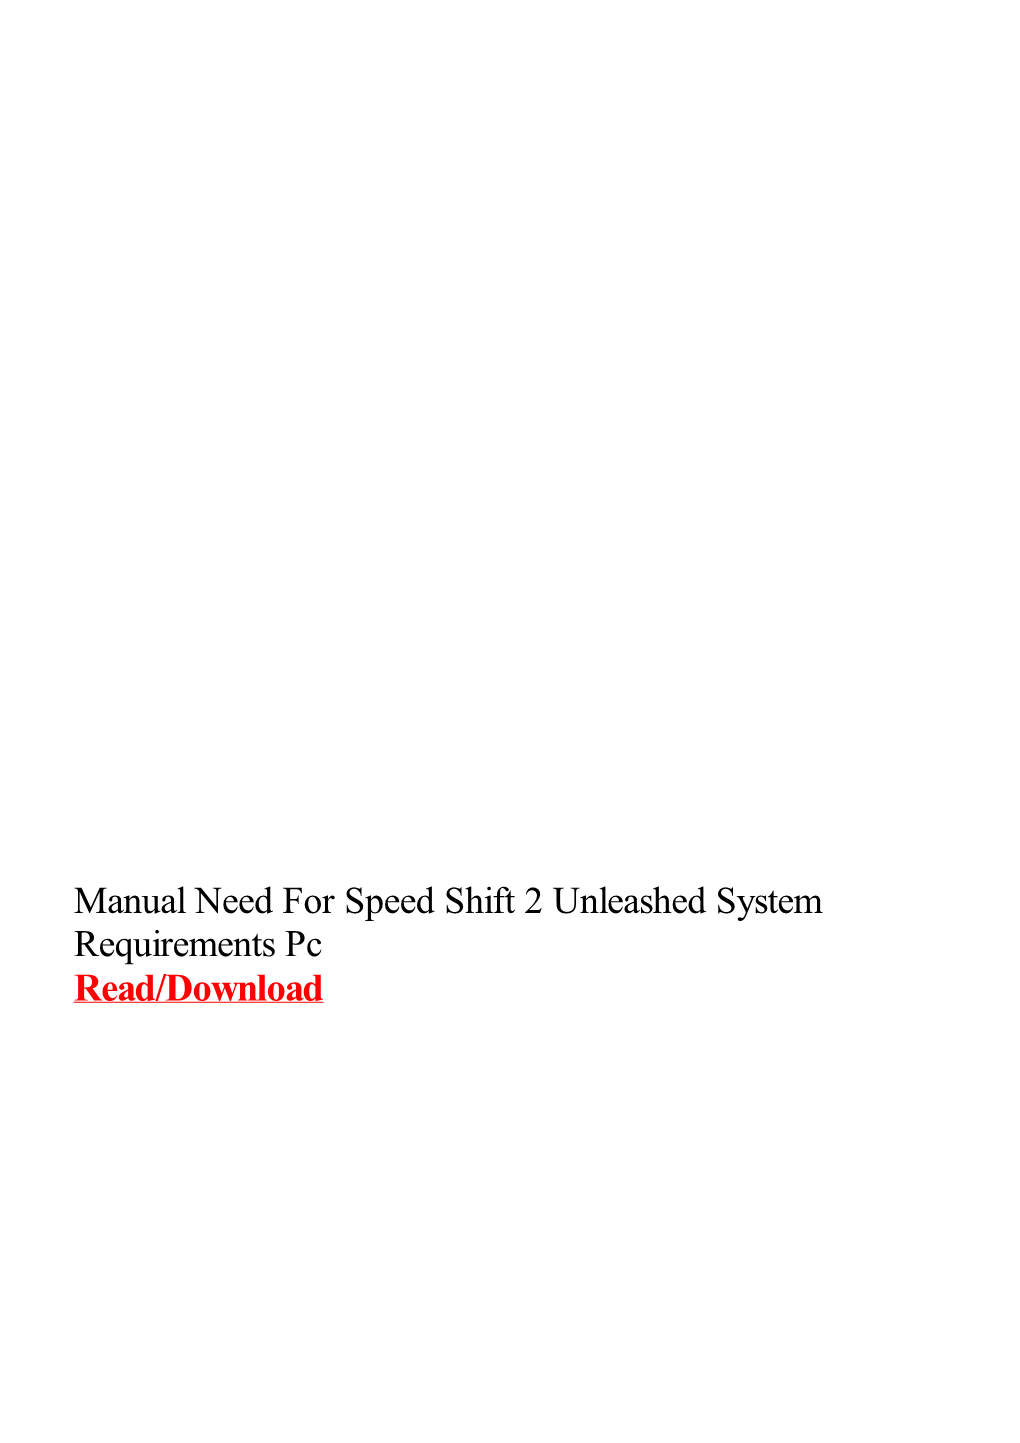 Manual Need for Speed Shift 2 Unleashed System Requirements Pc